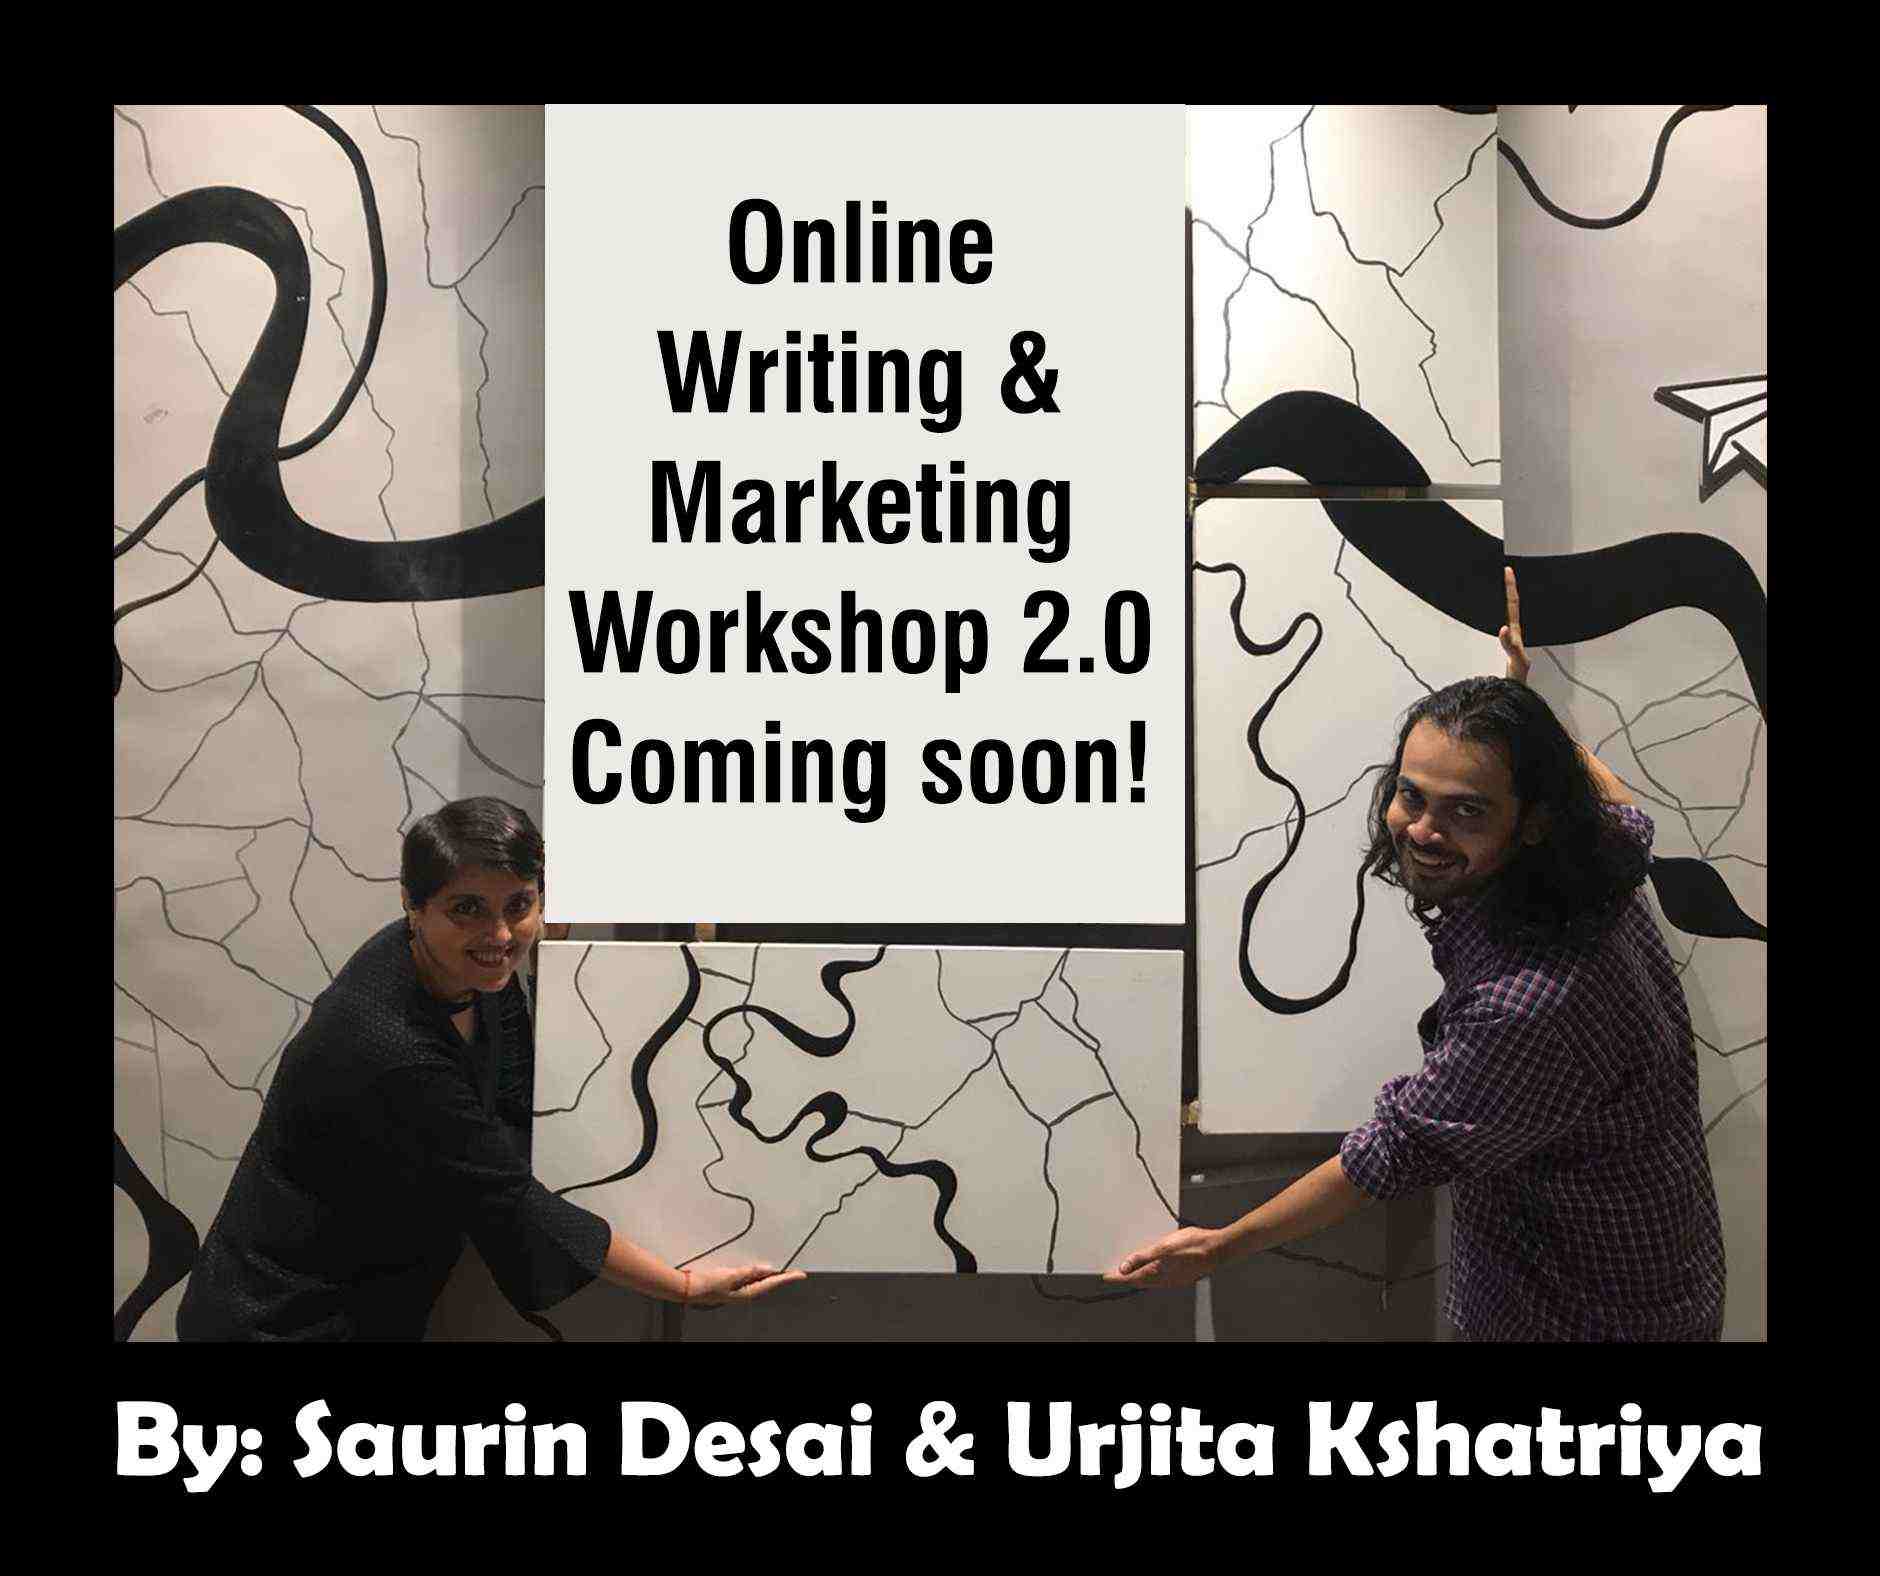 Online writing and marketing workshop by Urjita and Saurin